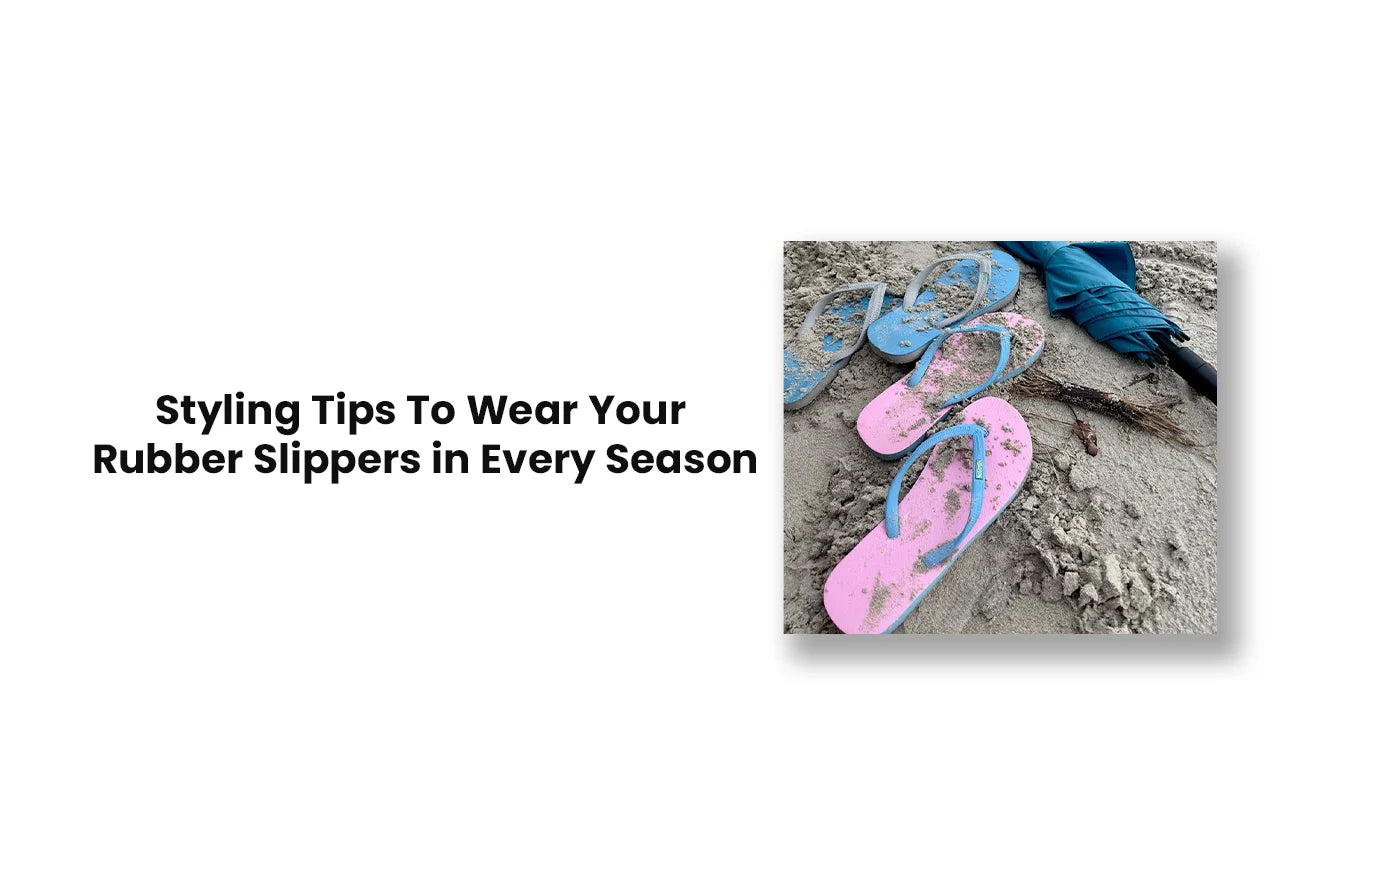 Styling Tips To Wear Your Rubber Slippers in Every Season